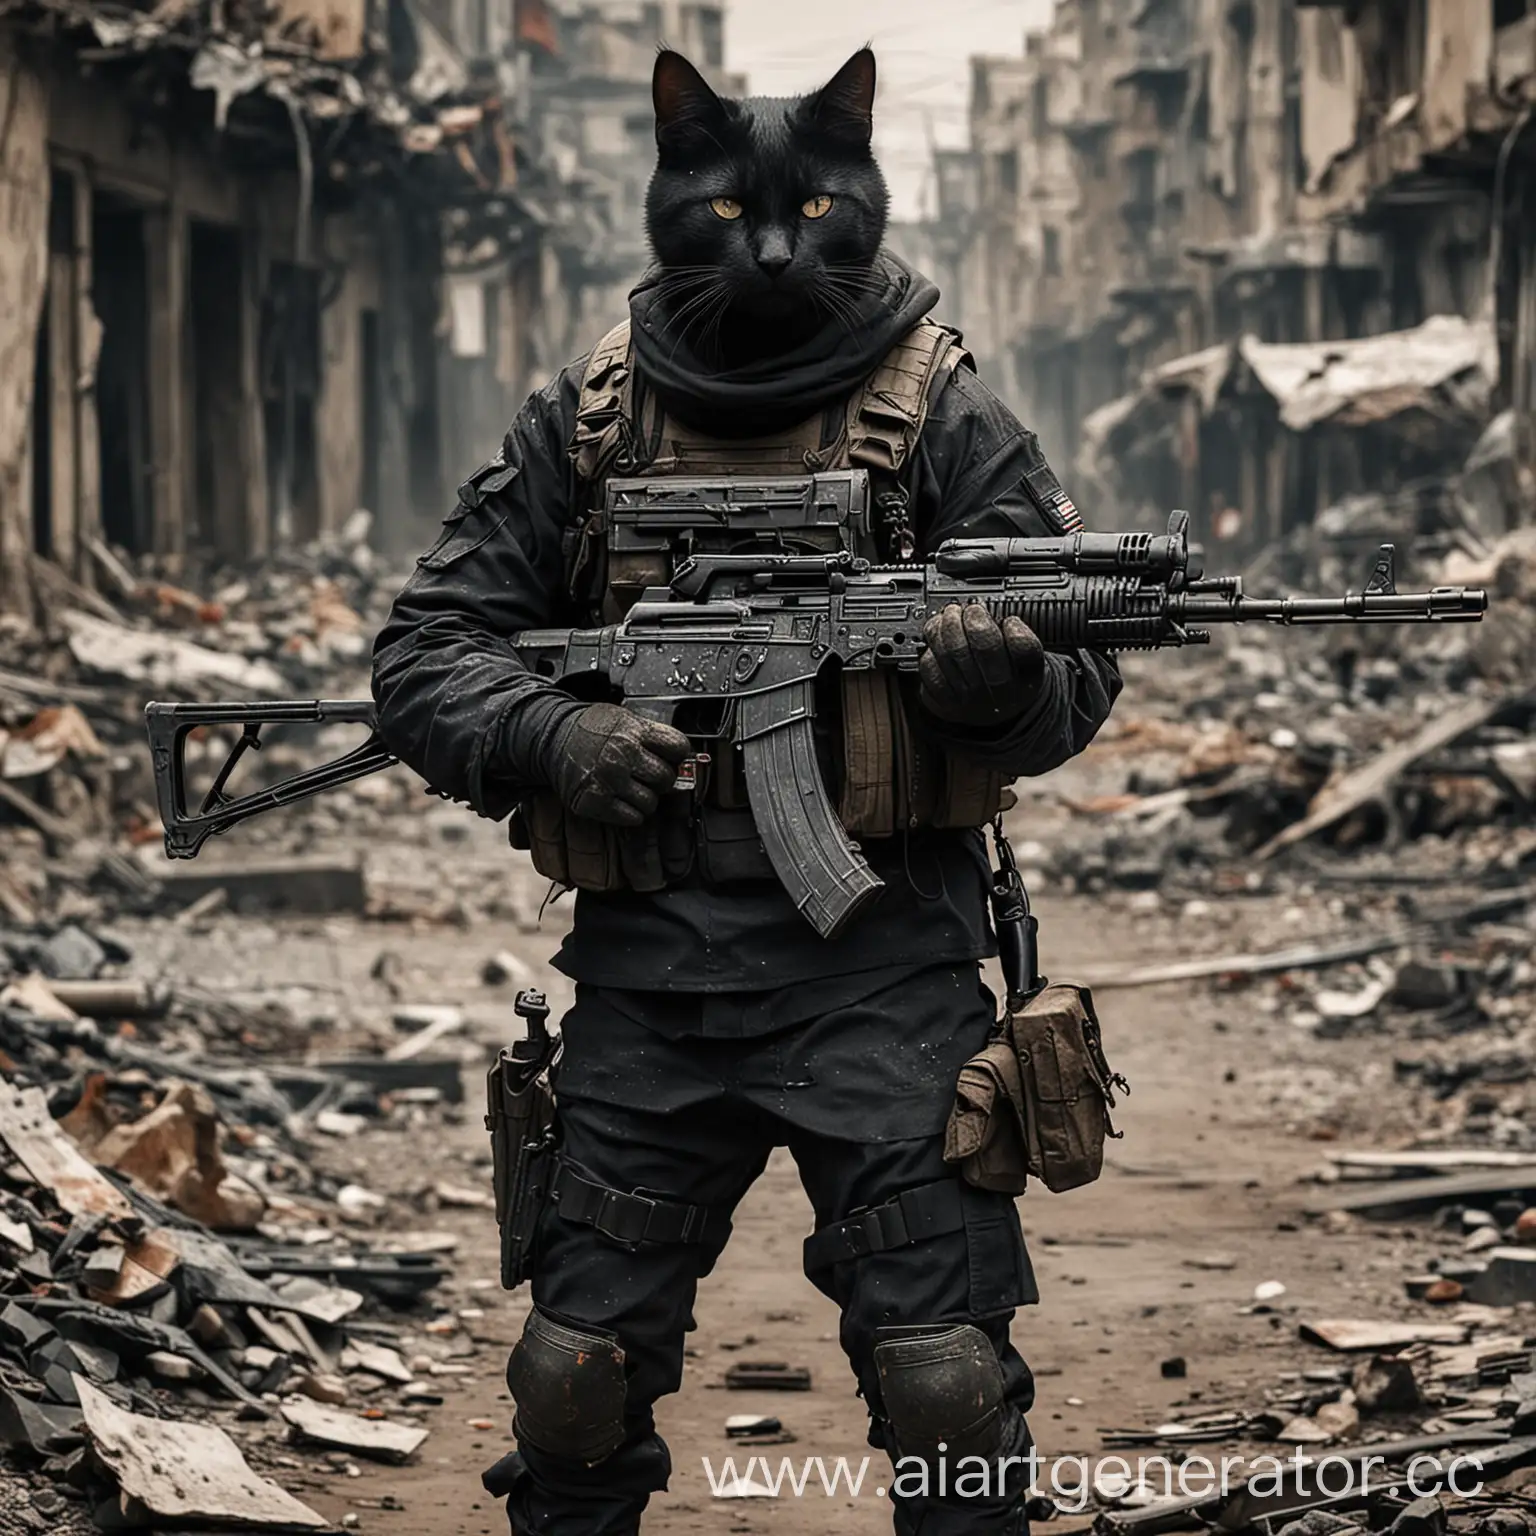 His name - tireos. He is solder of dead world. his weapon AK-74U. His pat - black cat. He stay in destroyed sity.